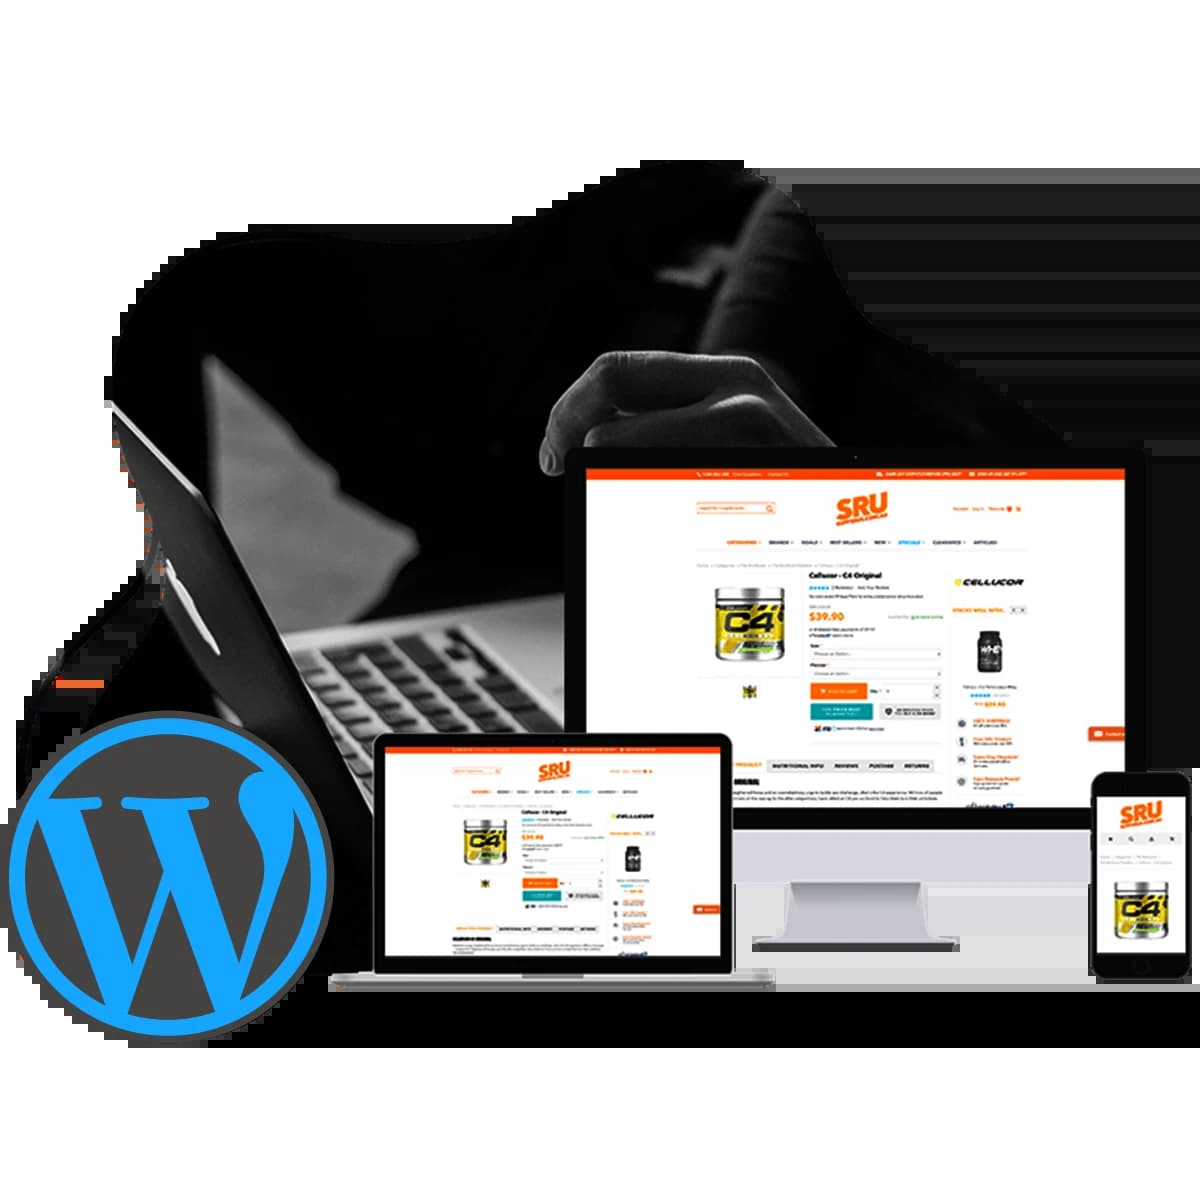 Learn how to use WordPress to create optimised sites for search engines, secure, and easy to maintain with our WordPress Training in Delhi.